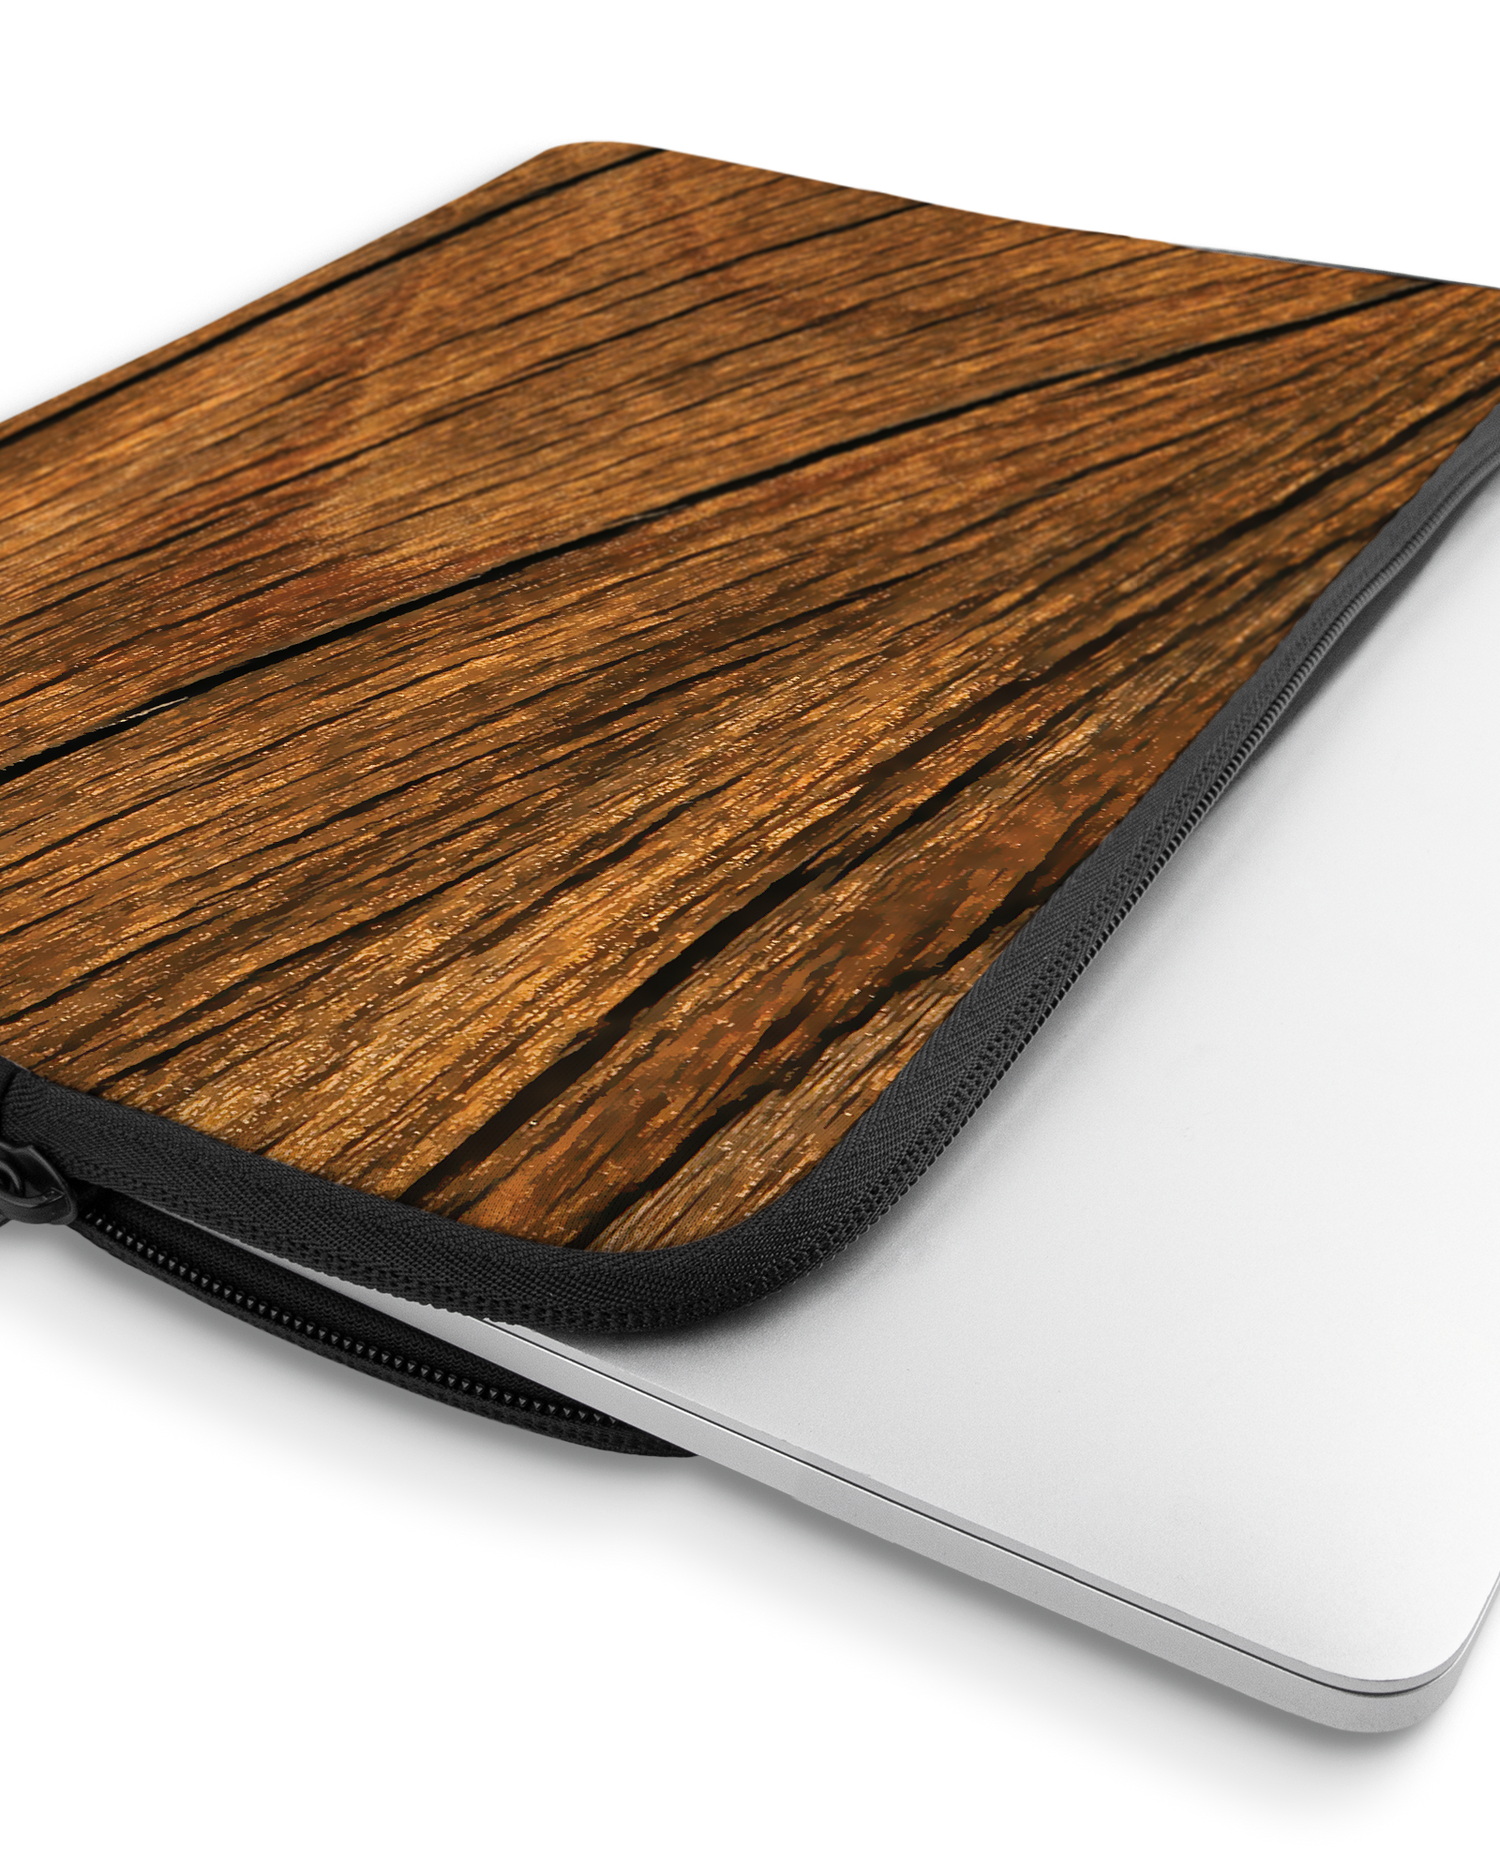 Wood Laptop Case 13 inch with device inside